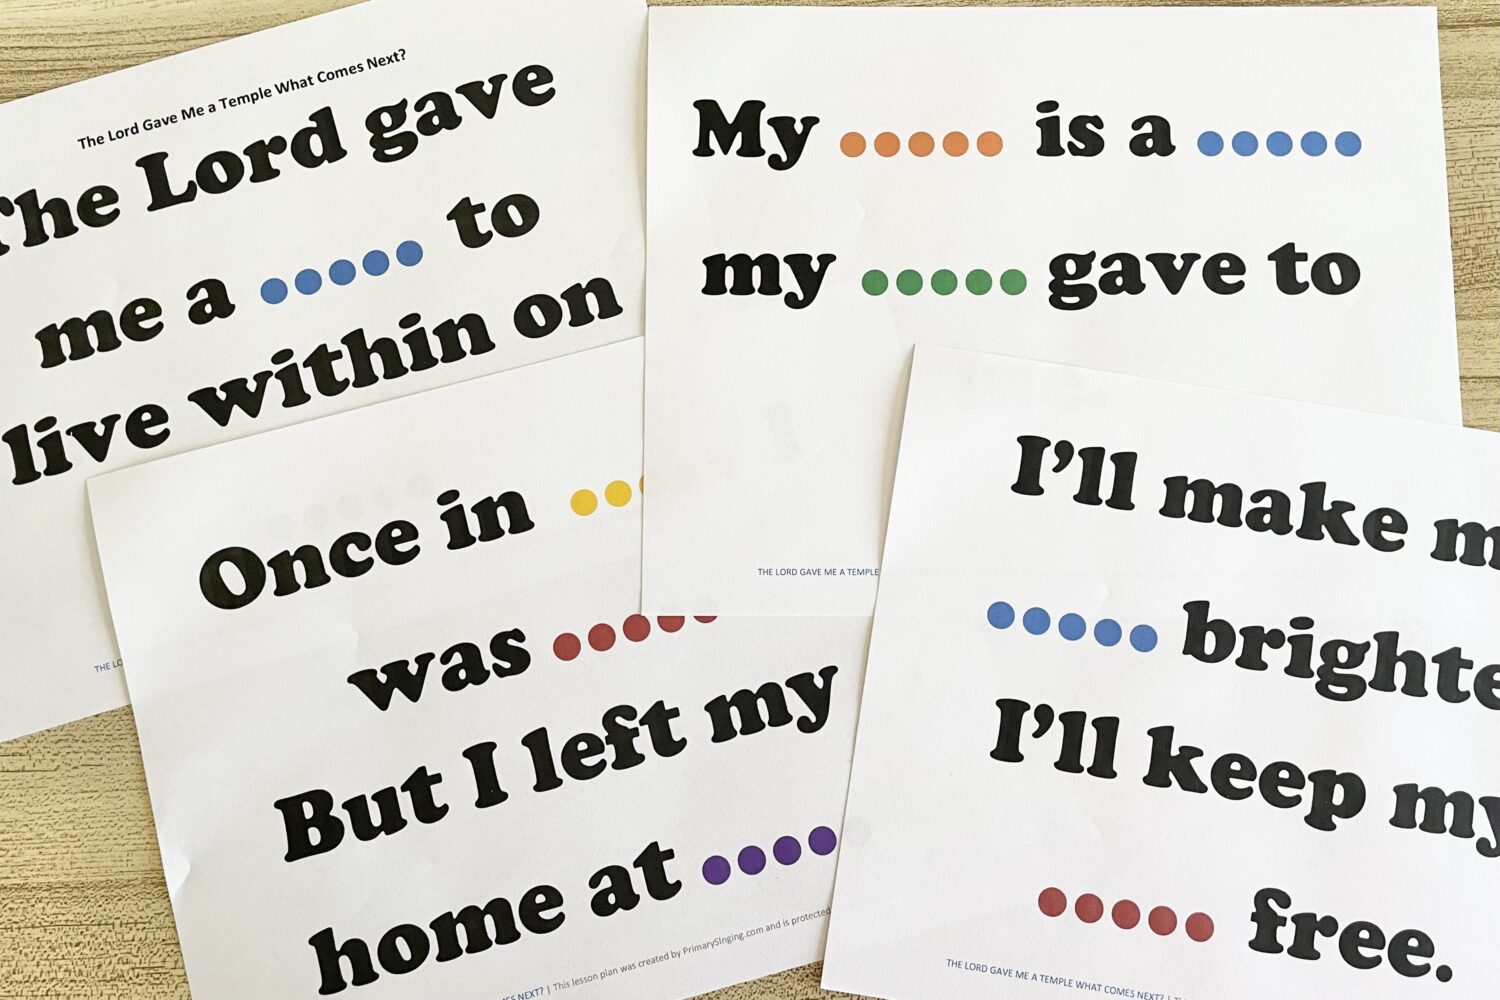 The Lord Gave Me a Temple What Comes Next? Use this fun word game with dot words to determine which keyword comes next. Includes extension ideas and printable for LDS Primary Music Leaders.